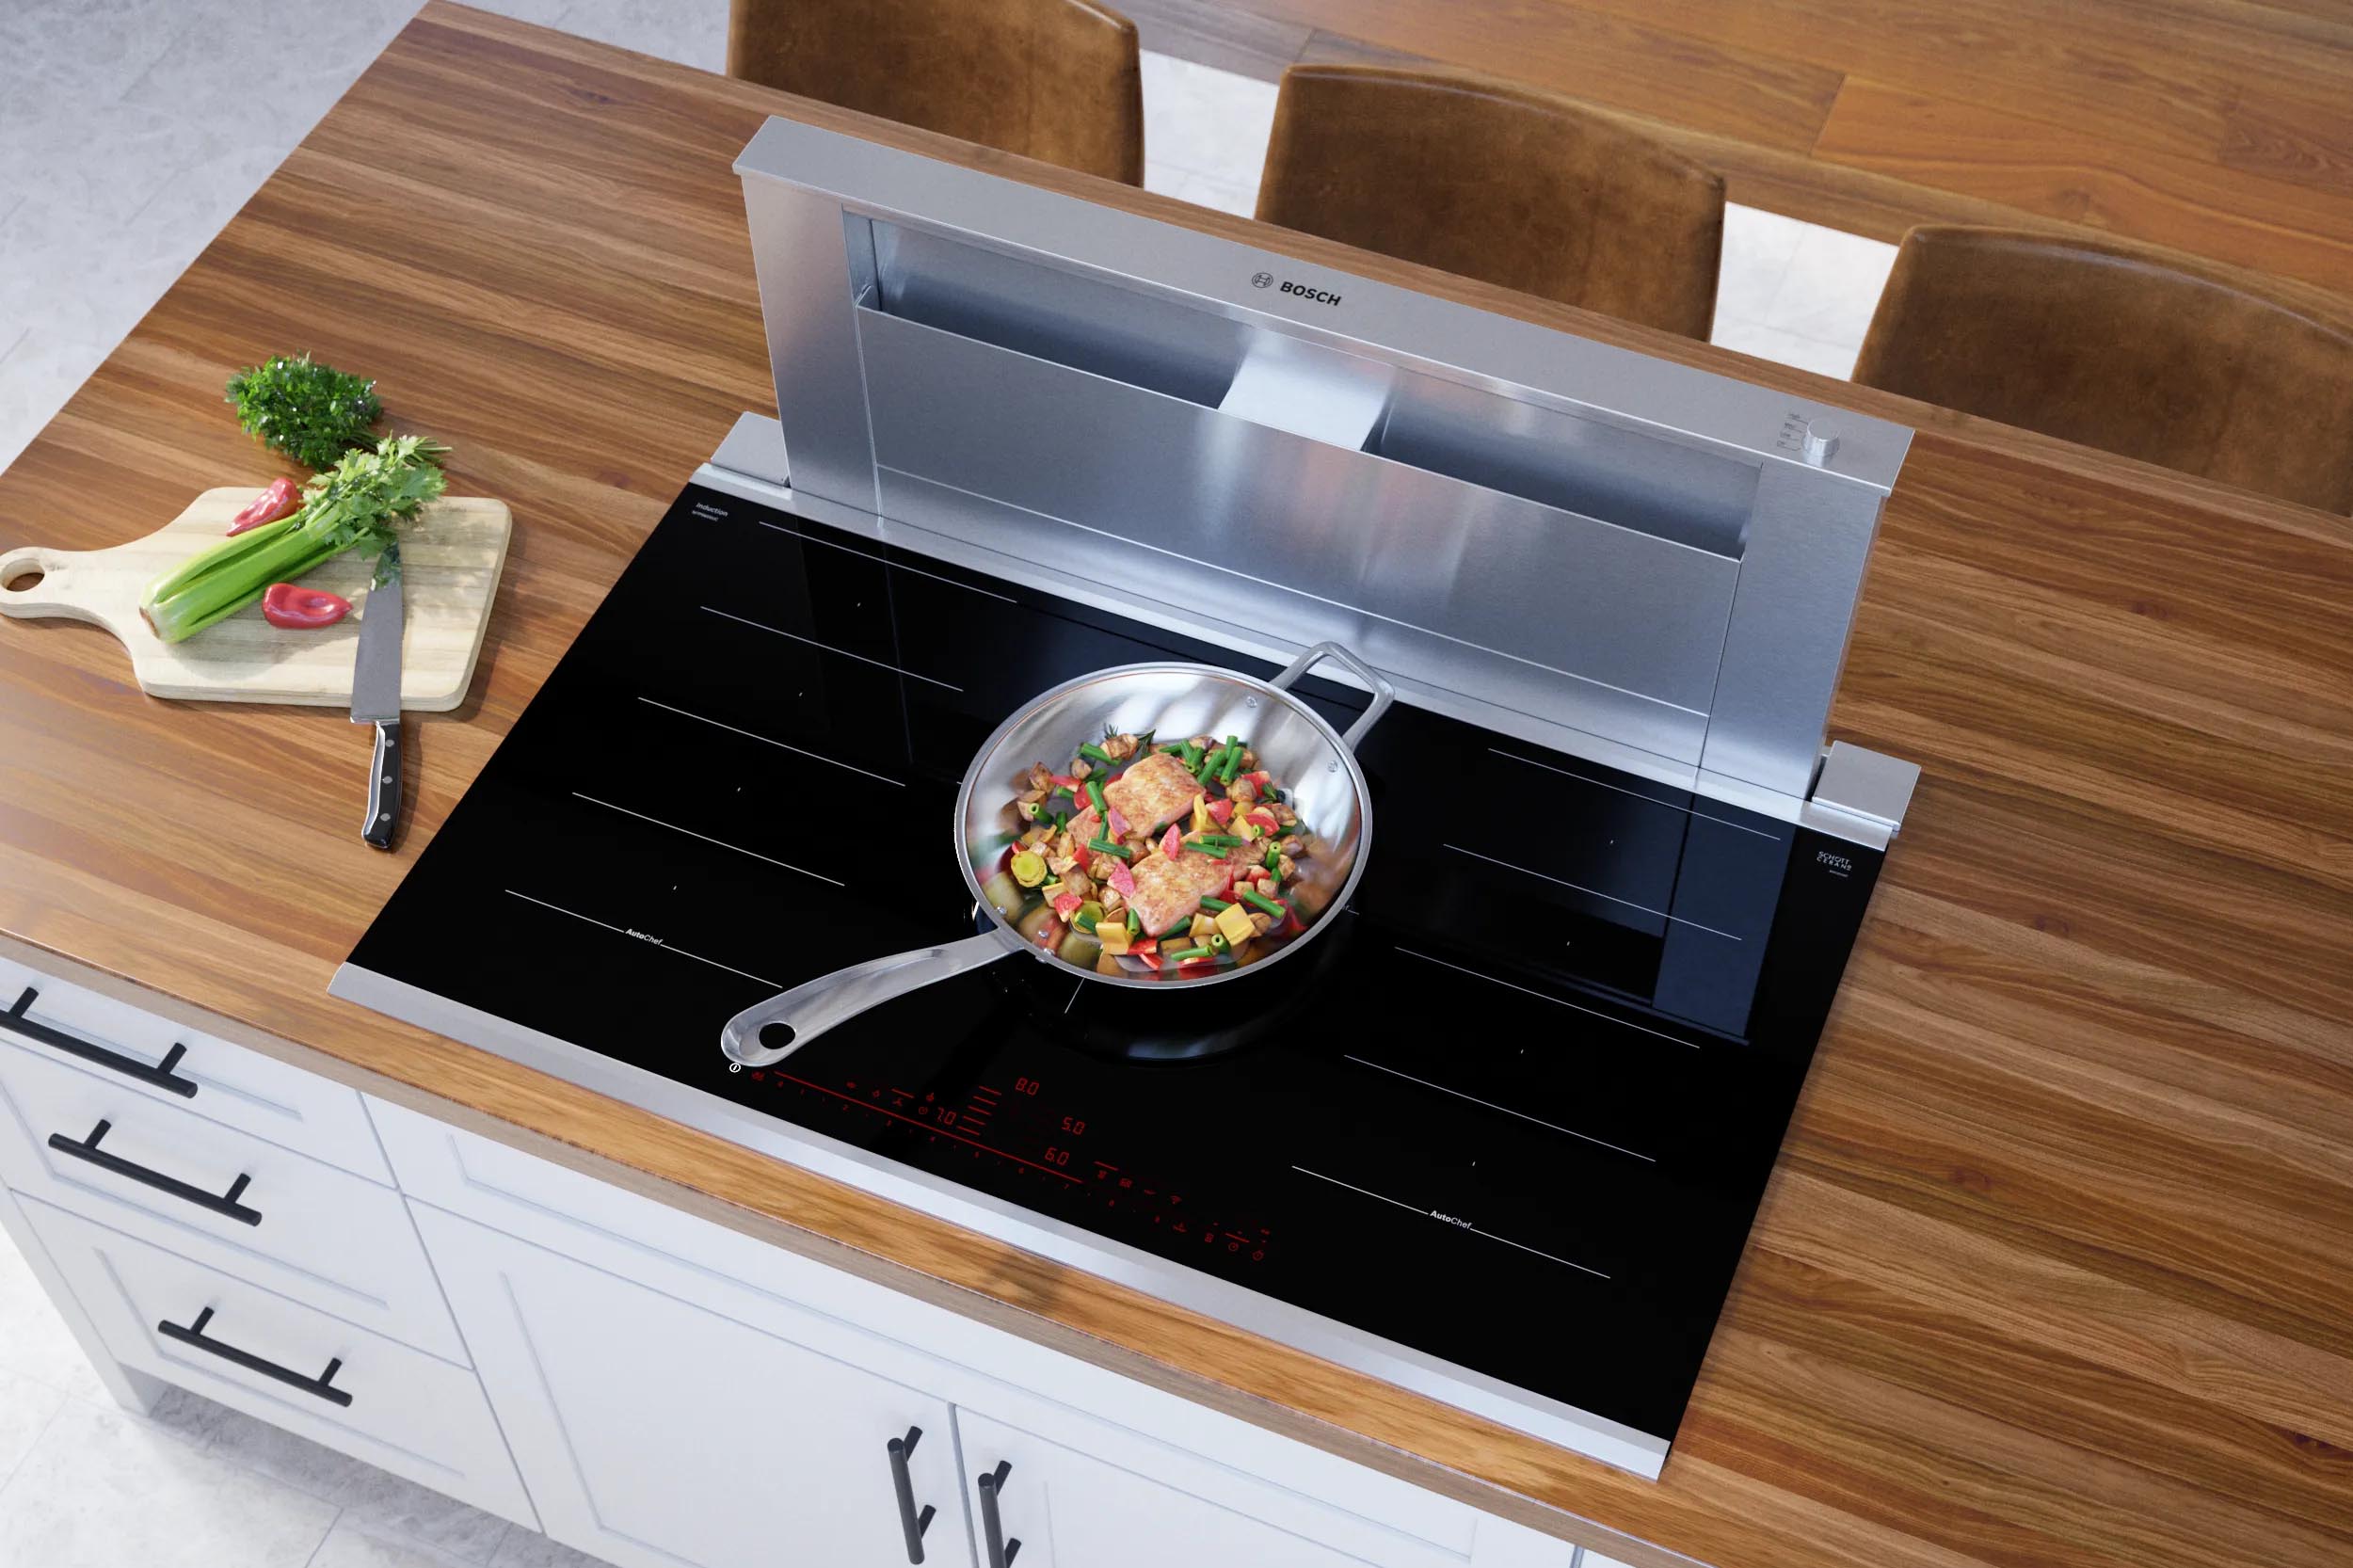 Worried About a Gas Stove Ban? These Induction Cooktops Could Be